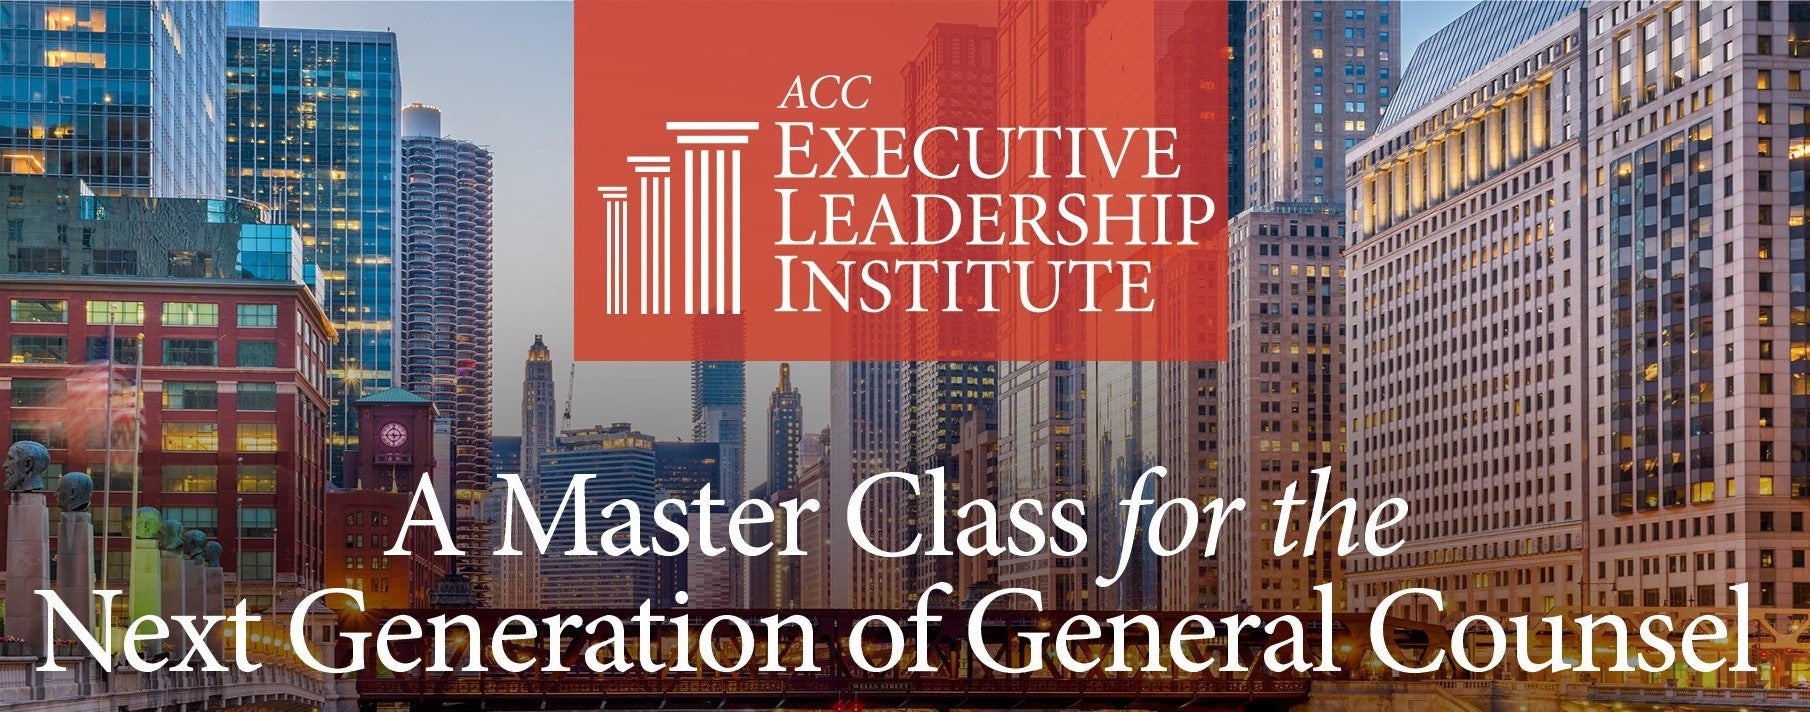 ACC Executive Leadership Institute A Master Class for the Next Generation of General Counsel